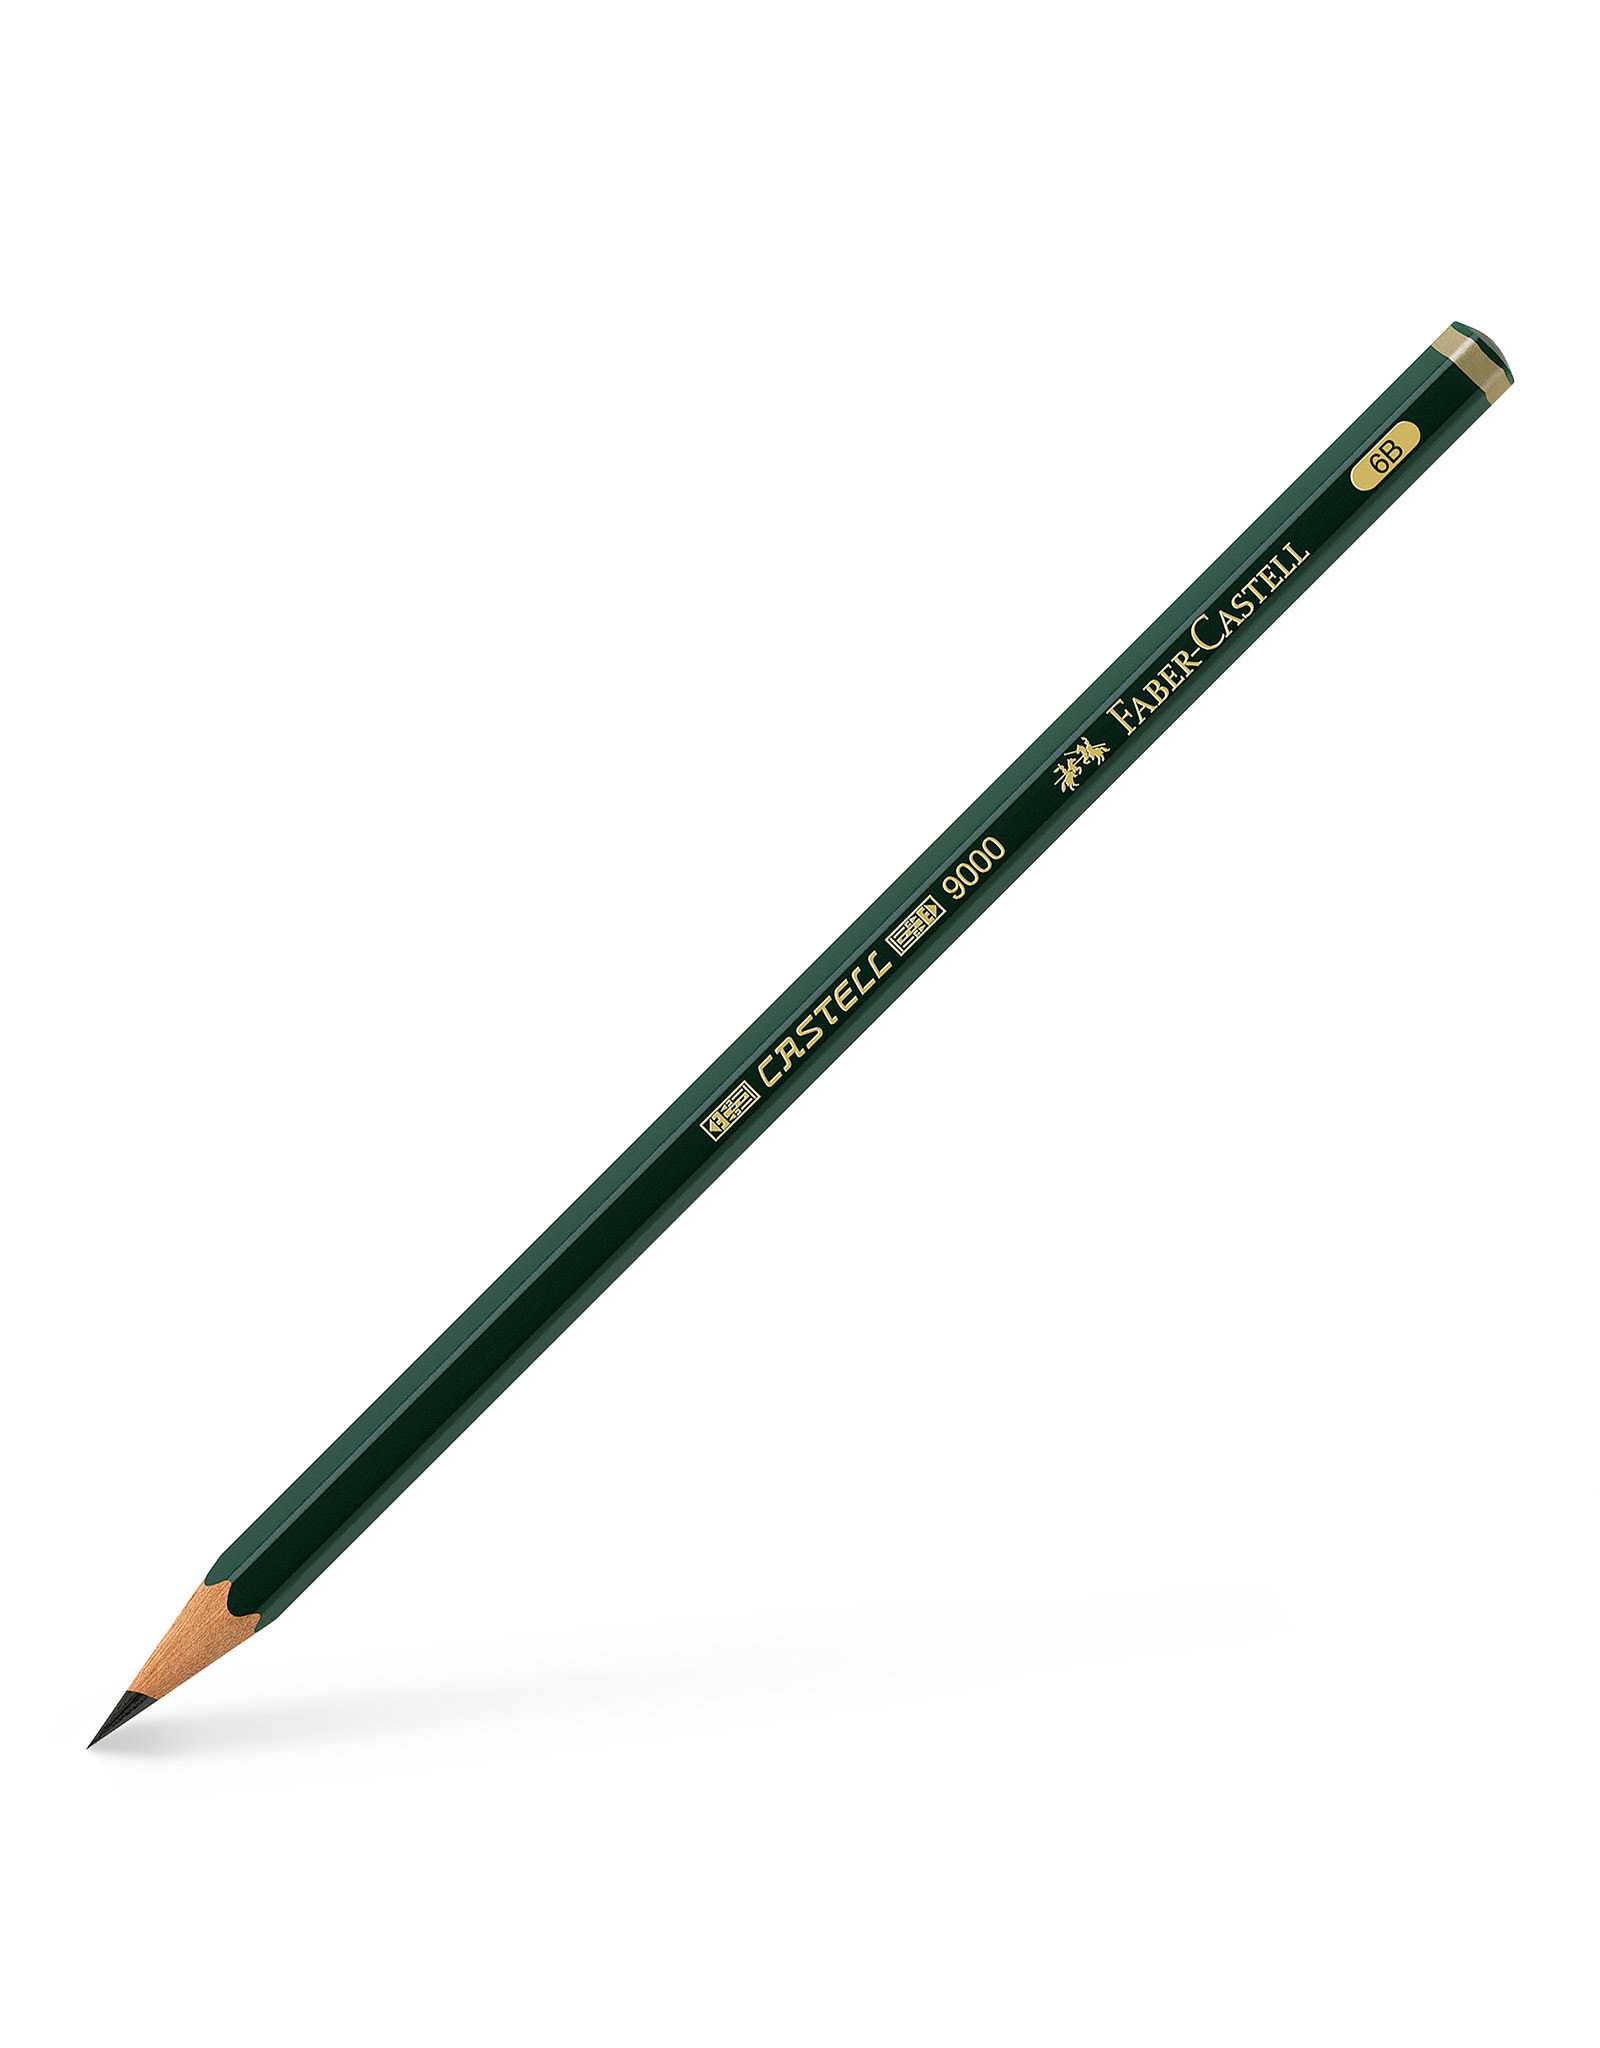 FABER-CASTELL Castell® 9000 Graphite Pencil, 6B